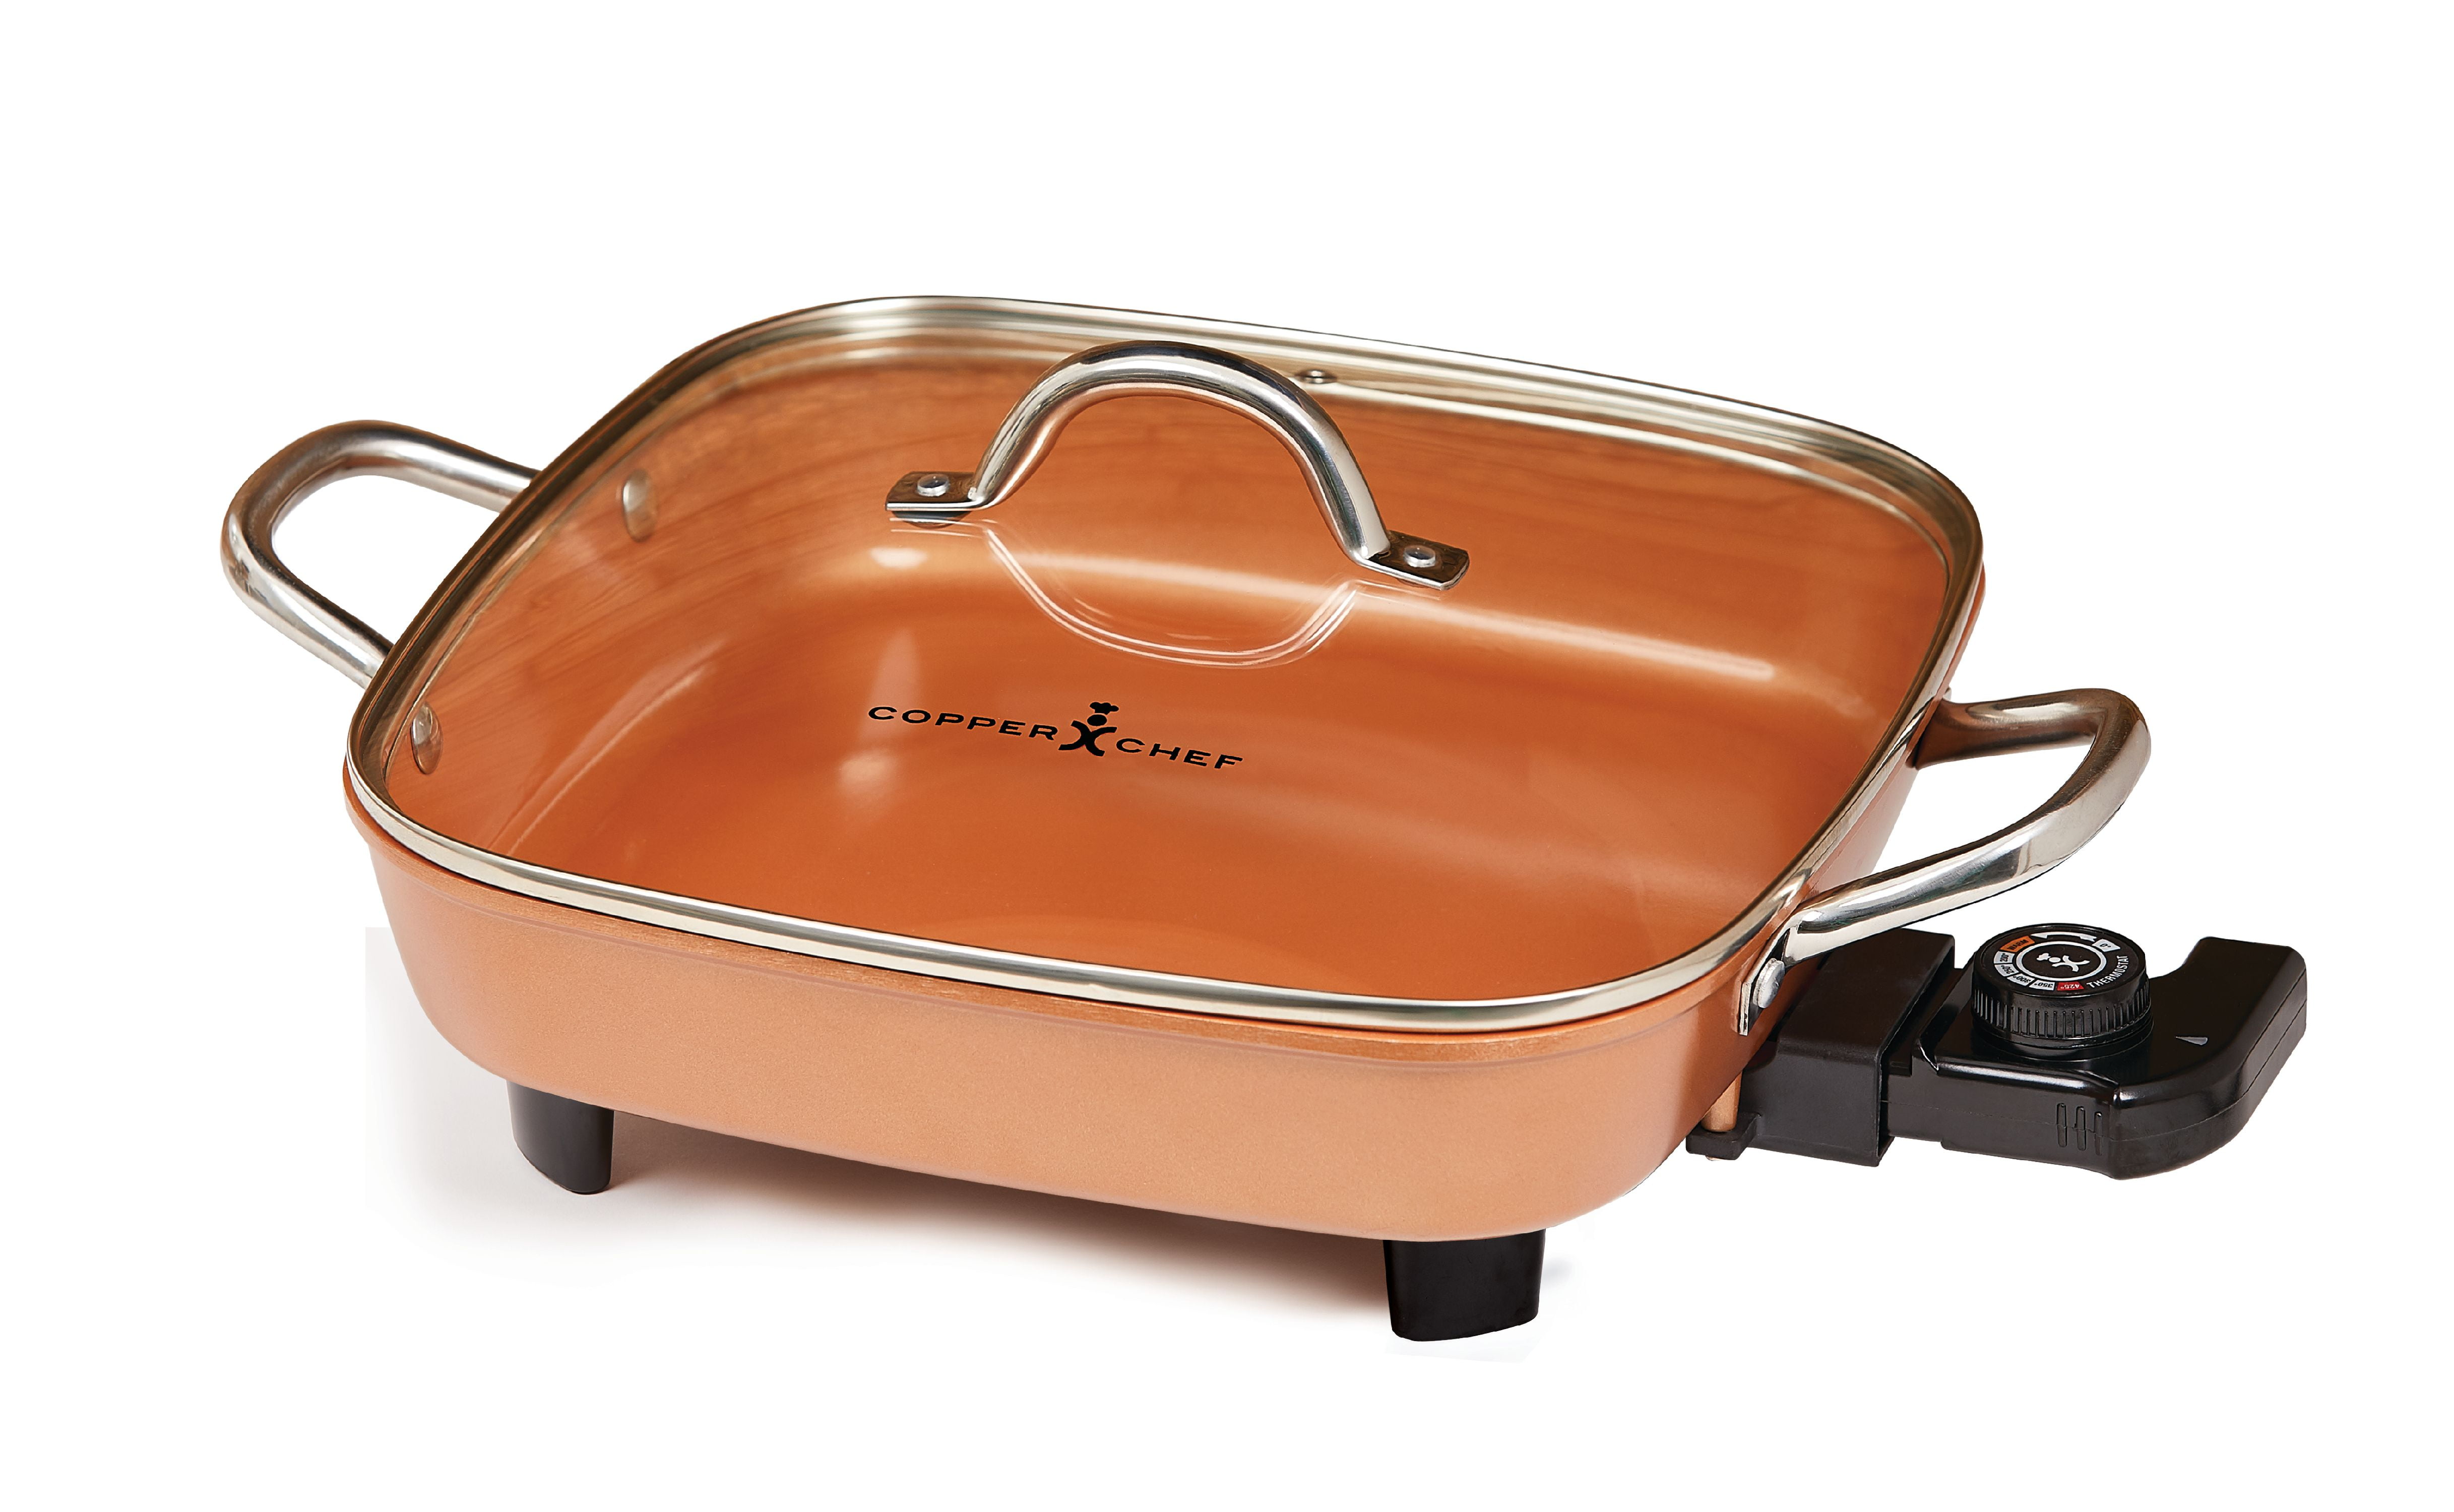 Buffet Server and in The Oven 12 removable electric skillet Copper Chef 12 Removable Electric Use as a Skillet